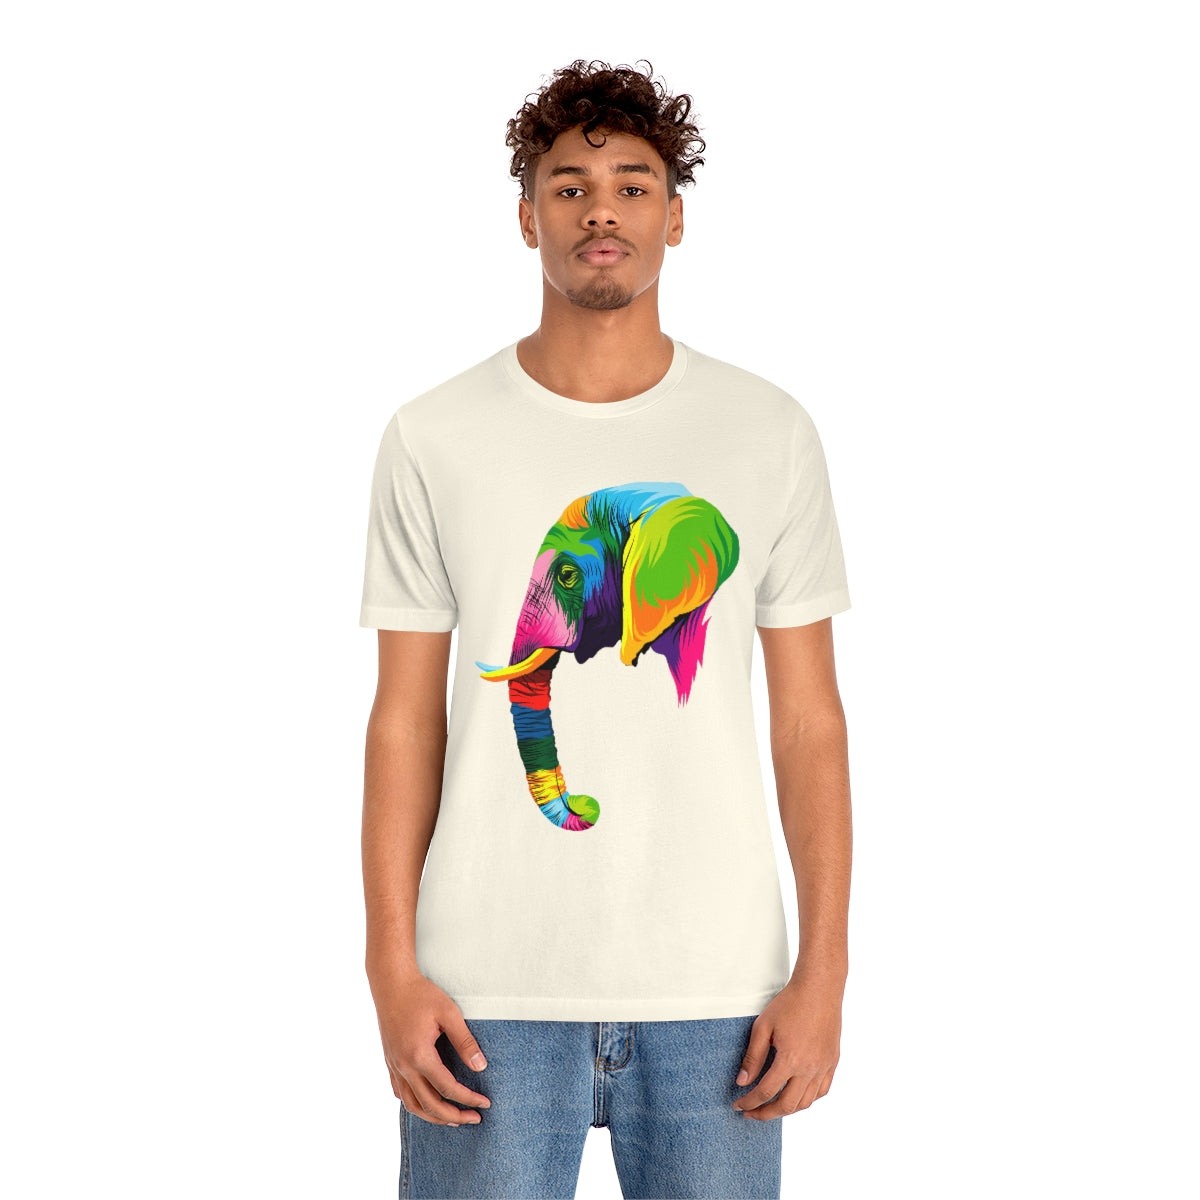 Unisex Jersey Short Sleeve Tee "Abstract colorful elephant"